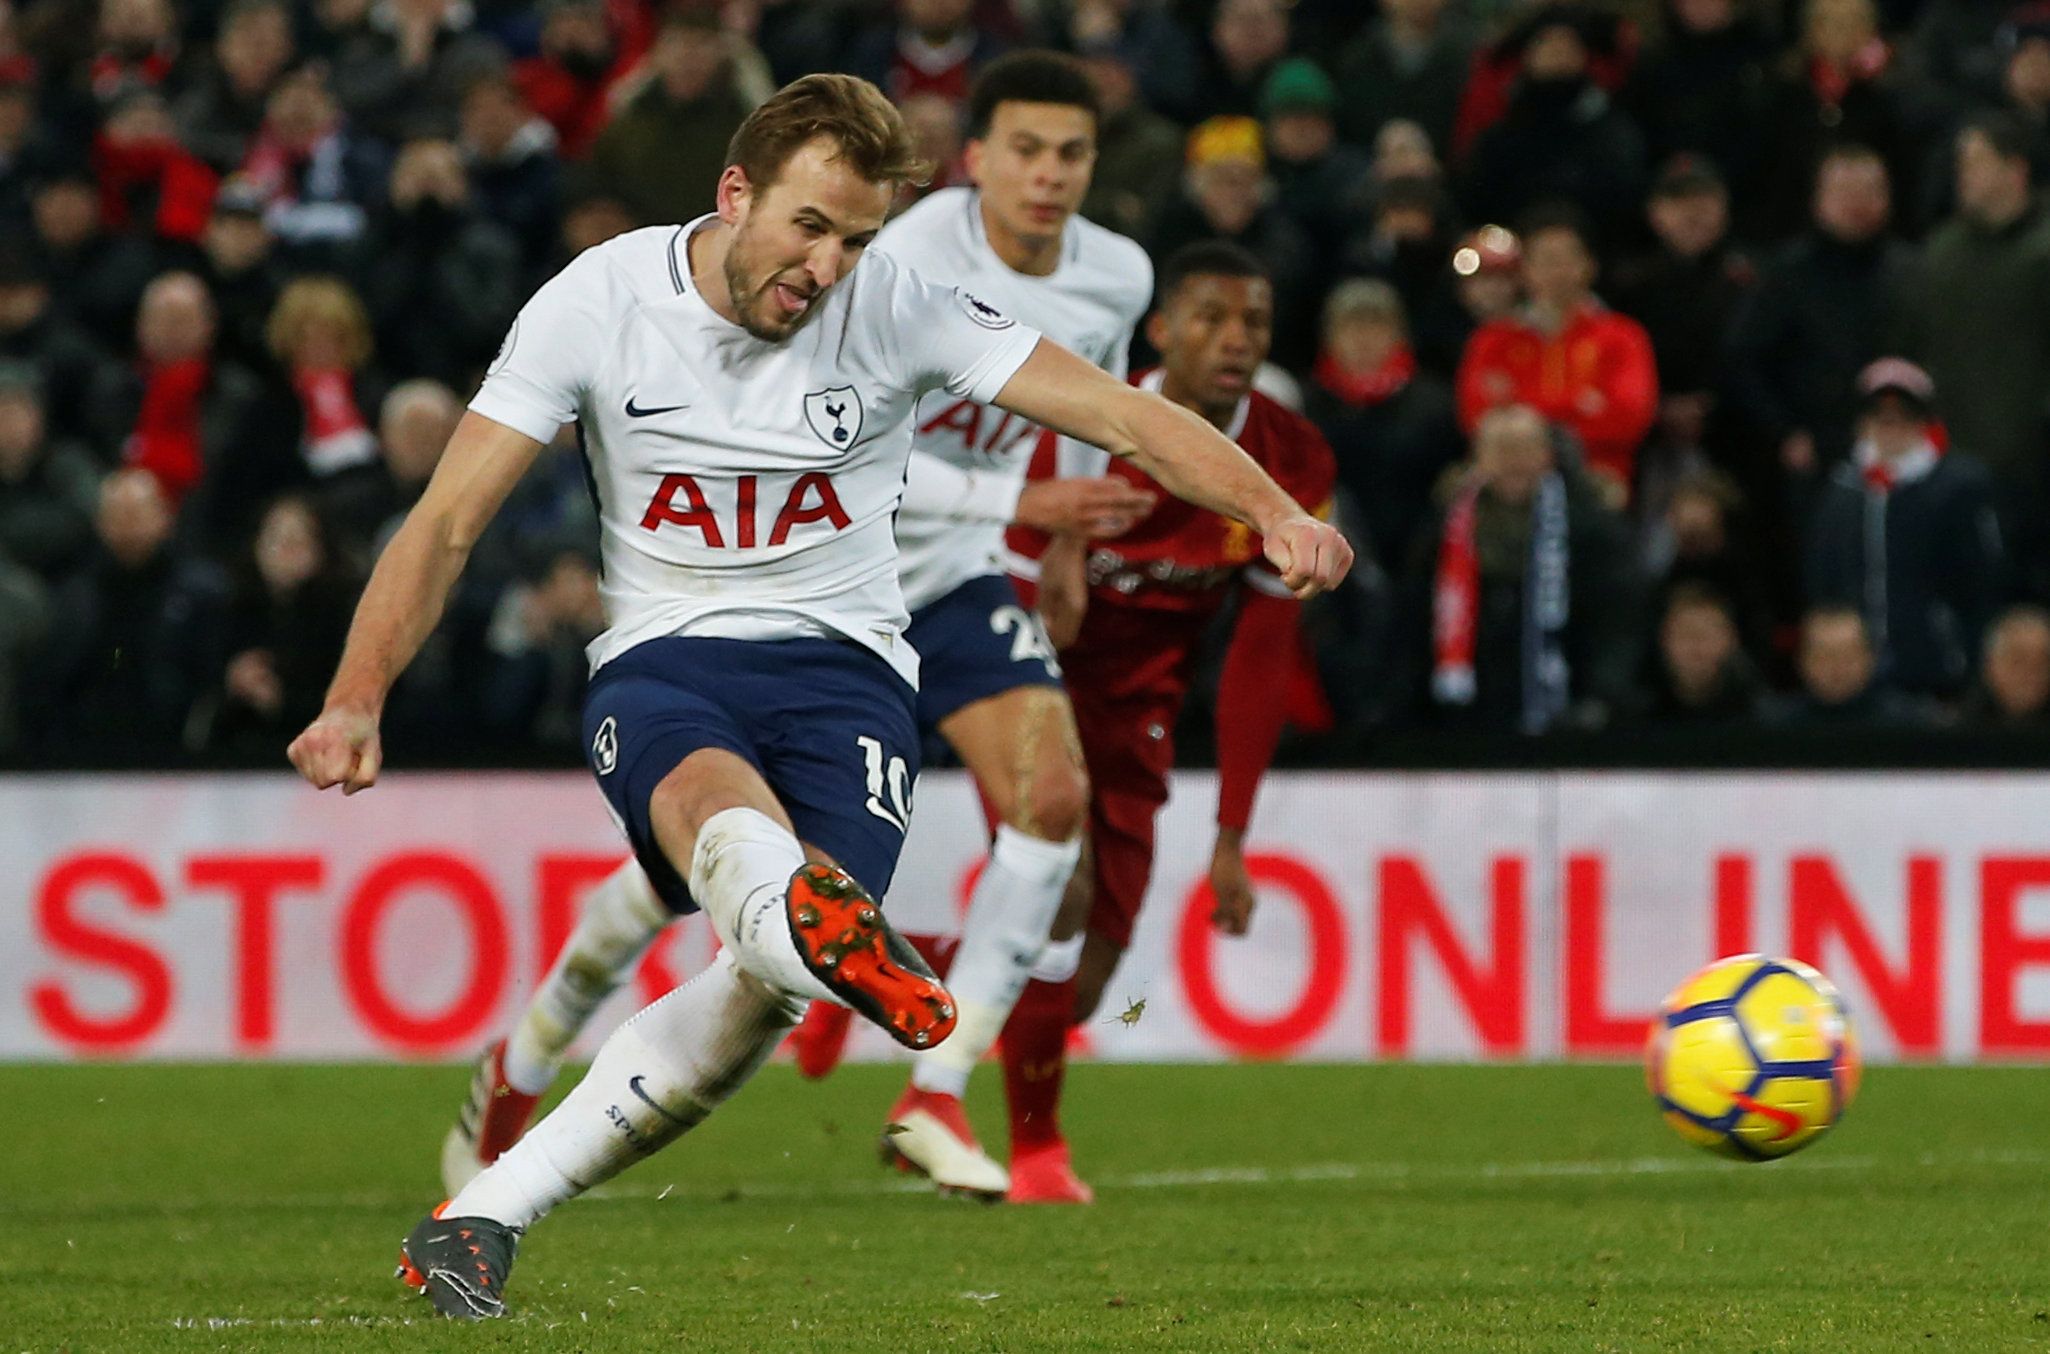 Soccer Football - Premier League - Liverpool vs Tottenham Hotspur - Anfield, Liverpool, Britain - February 4, 2018   Tottenham's Harry Kane scores their second goal from a penalty                         REUTERS/Andrew Yates    EDITORIAL USE ONLY. No use with unauthorized audio, video, data, fixture lists, club/league logos or 